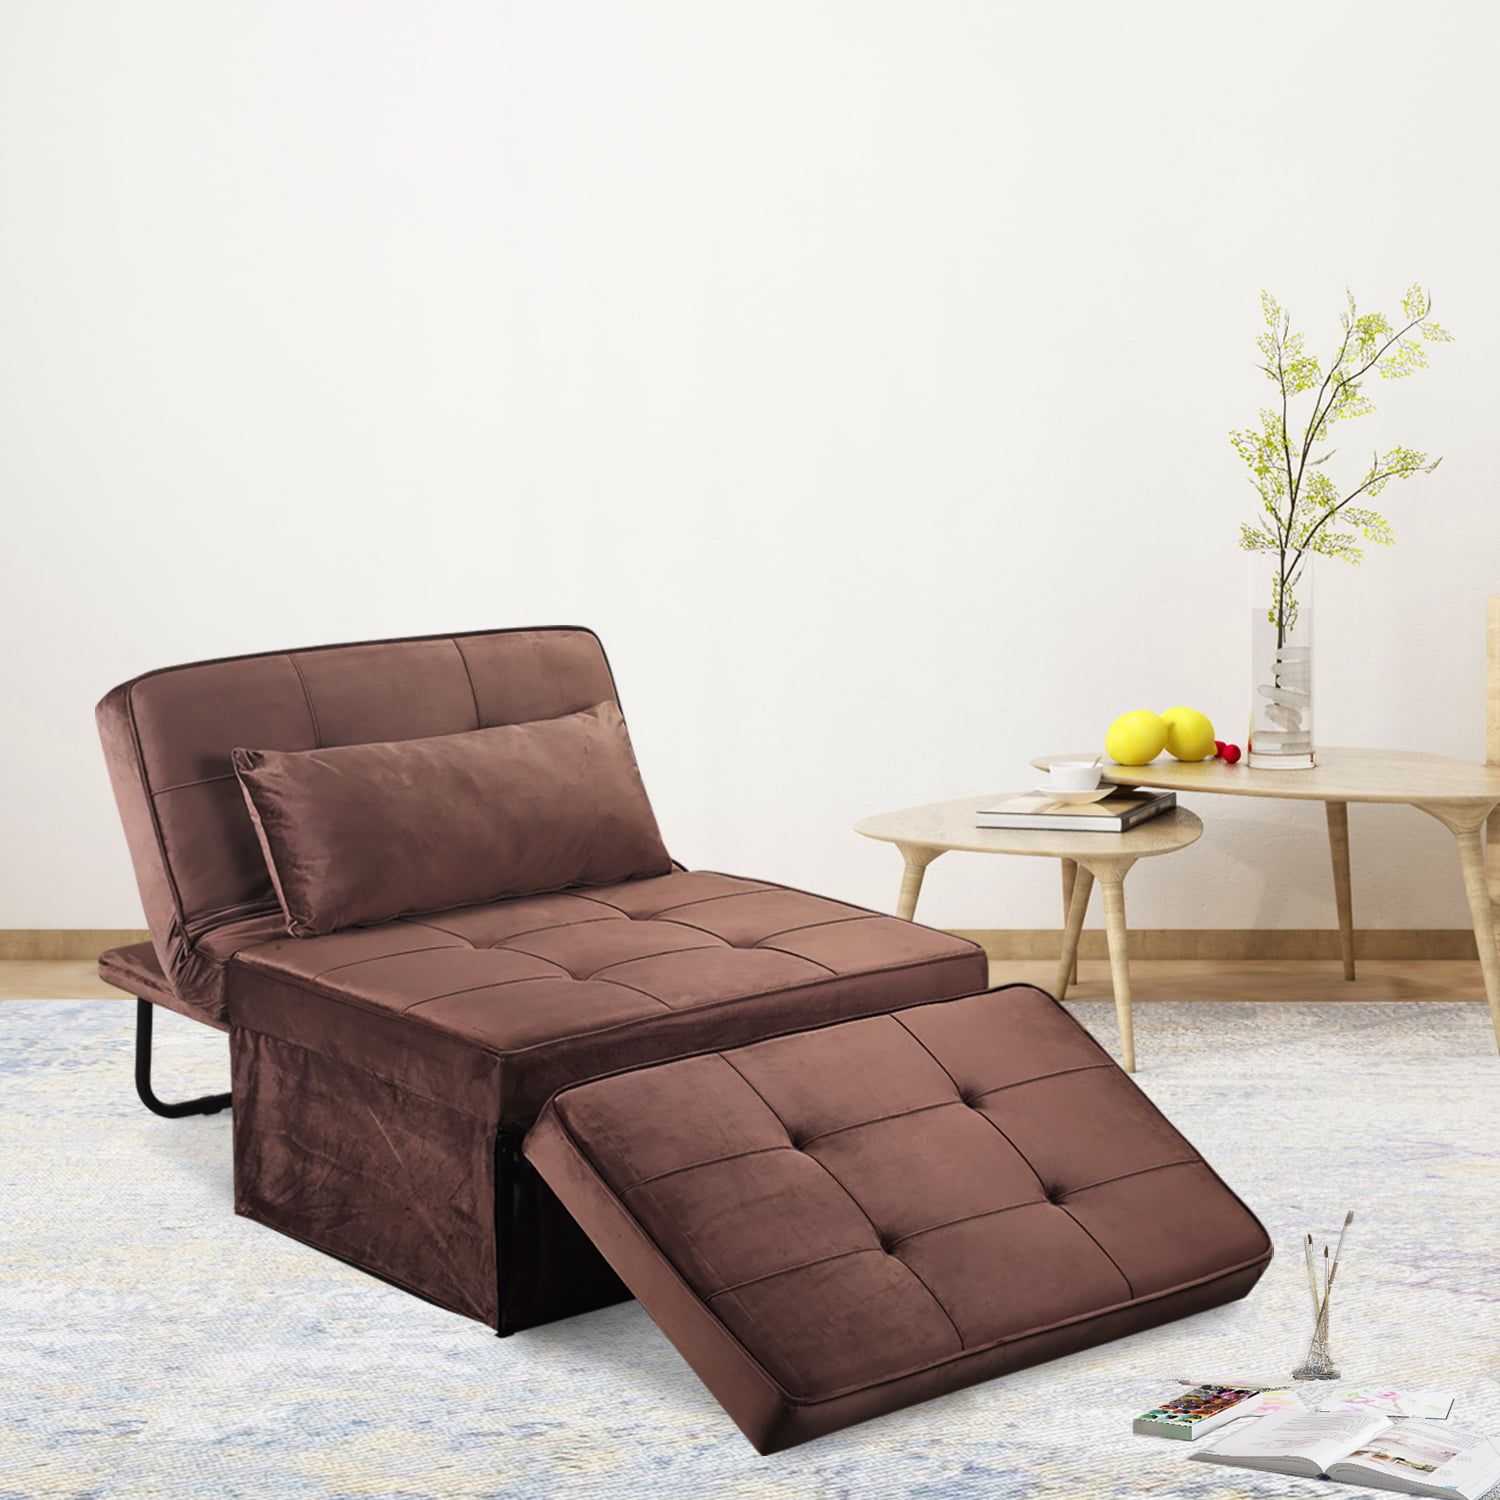 Ainfox 4 In 1 Ottoman Sleeper Guest Chair Sofa Bed Multi Function Pertaining To 4 In 1 Convertible Sleeper Chair Beds (Gallery 4 of 20)